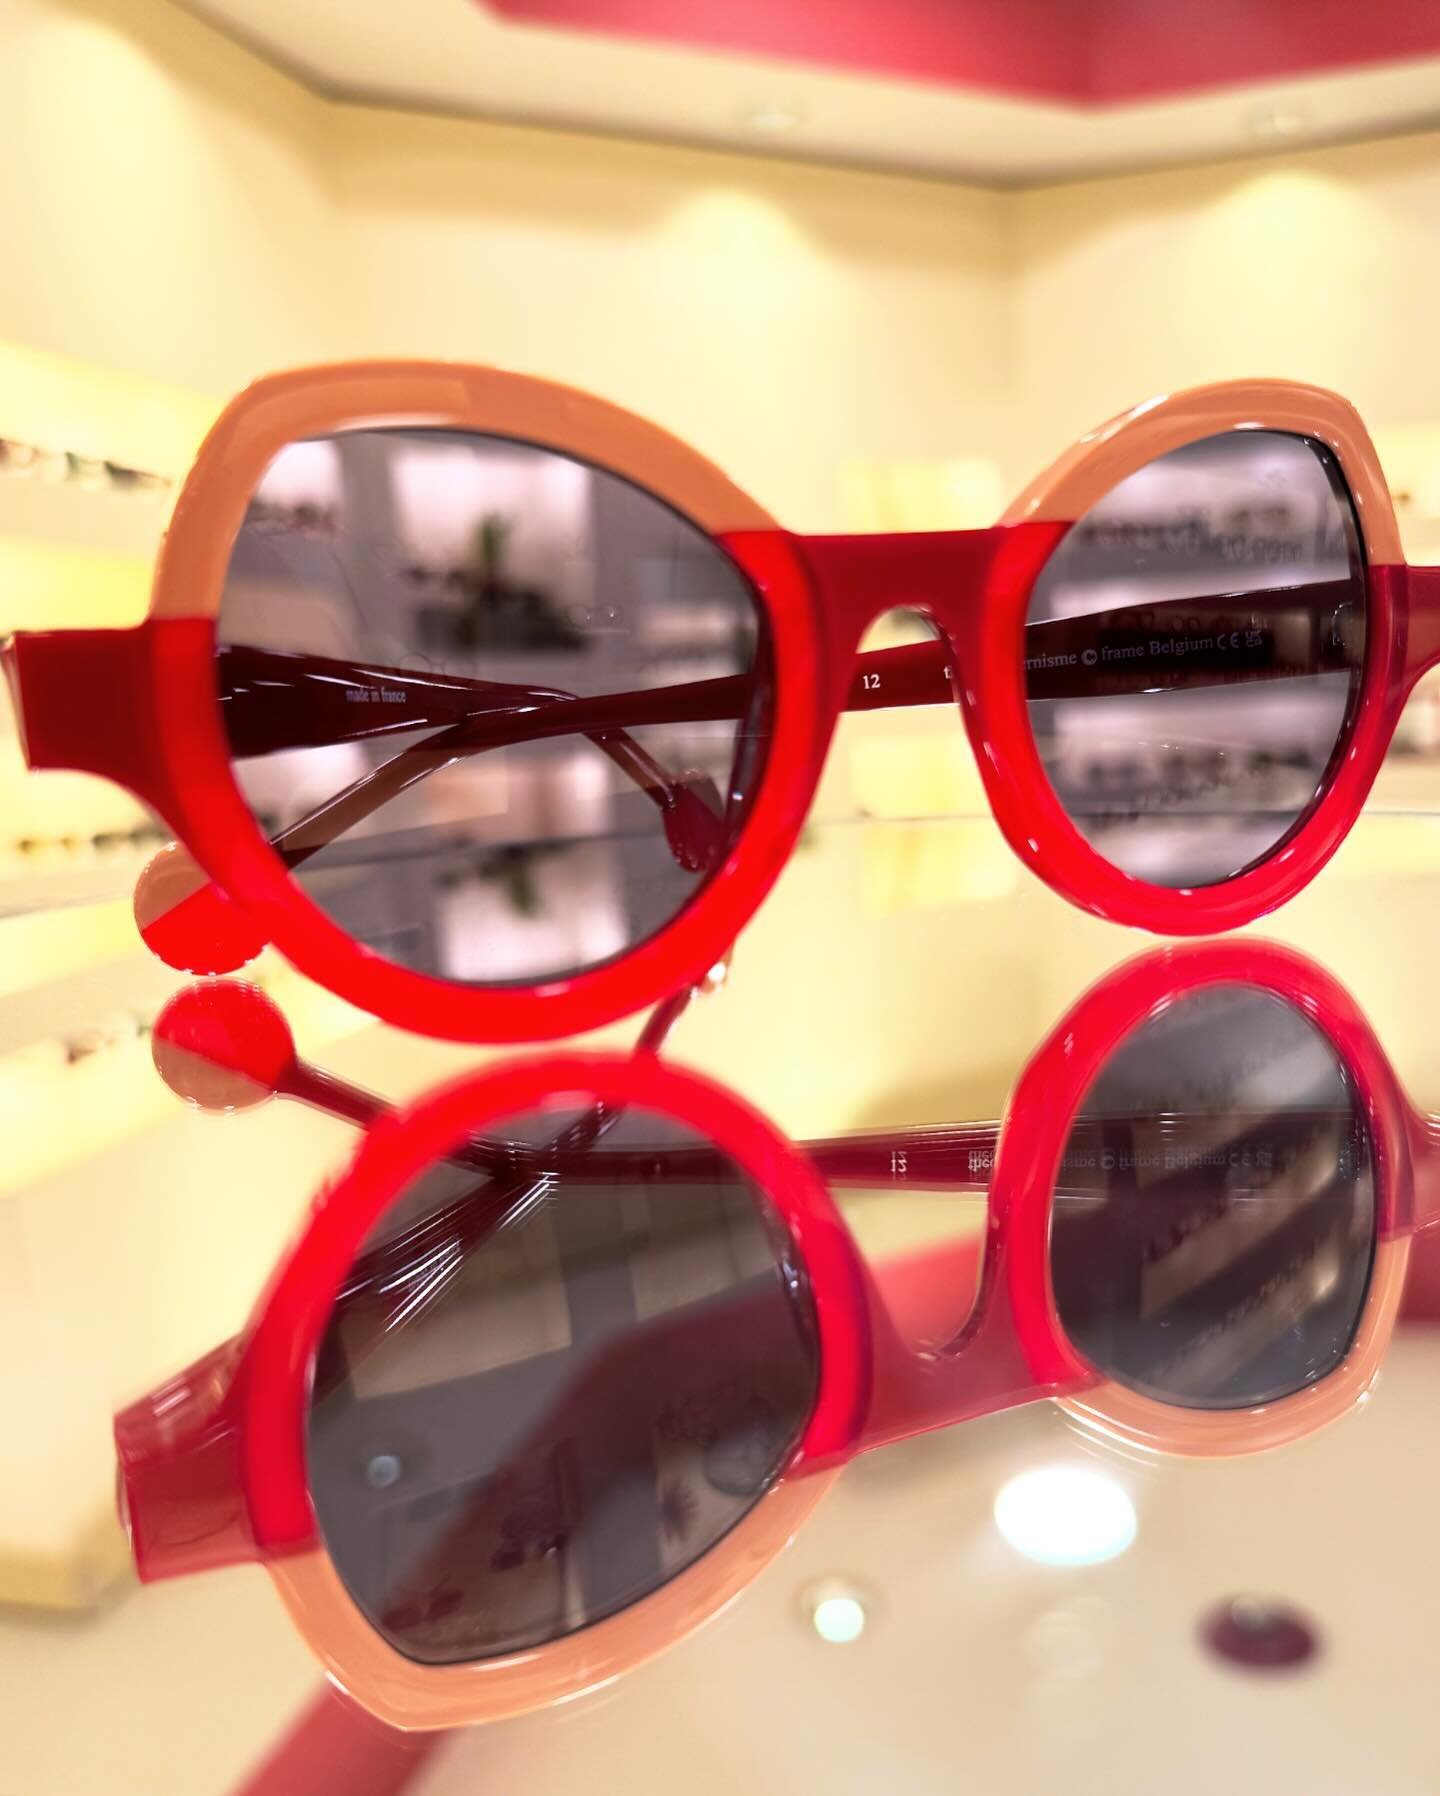 We are so excited to introduce our new summer sunglasses collection from Theo Eyewear! These amazing frames can only be found at Eye Designs in Scarsdale and come in a wide range of stunning colors. #sunglasses #shopsmall #fashion #BestOfWestchester